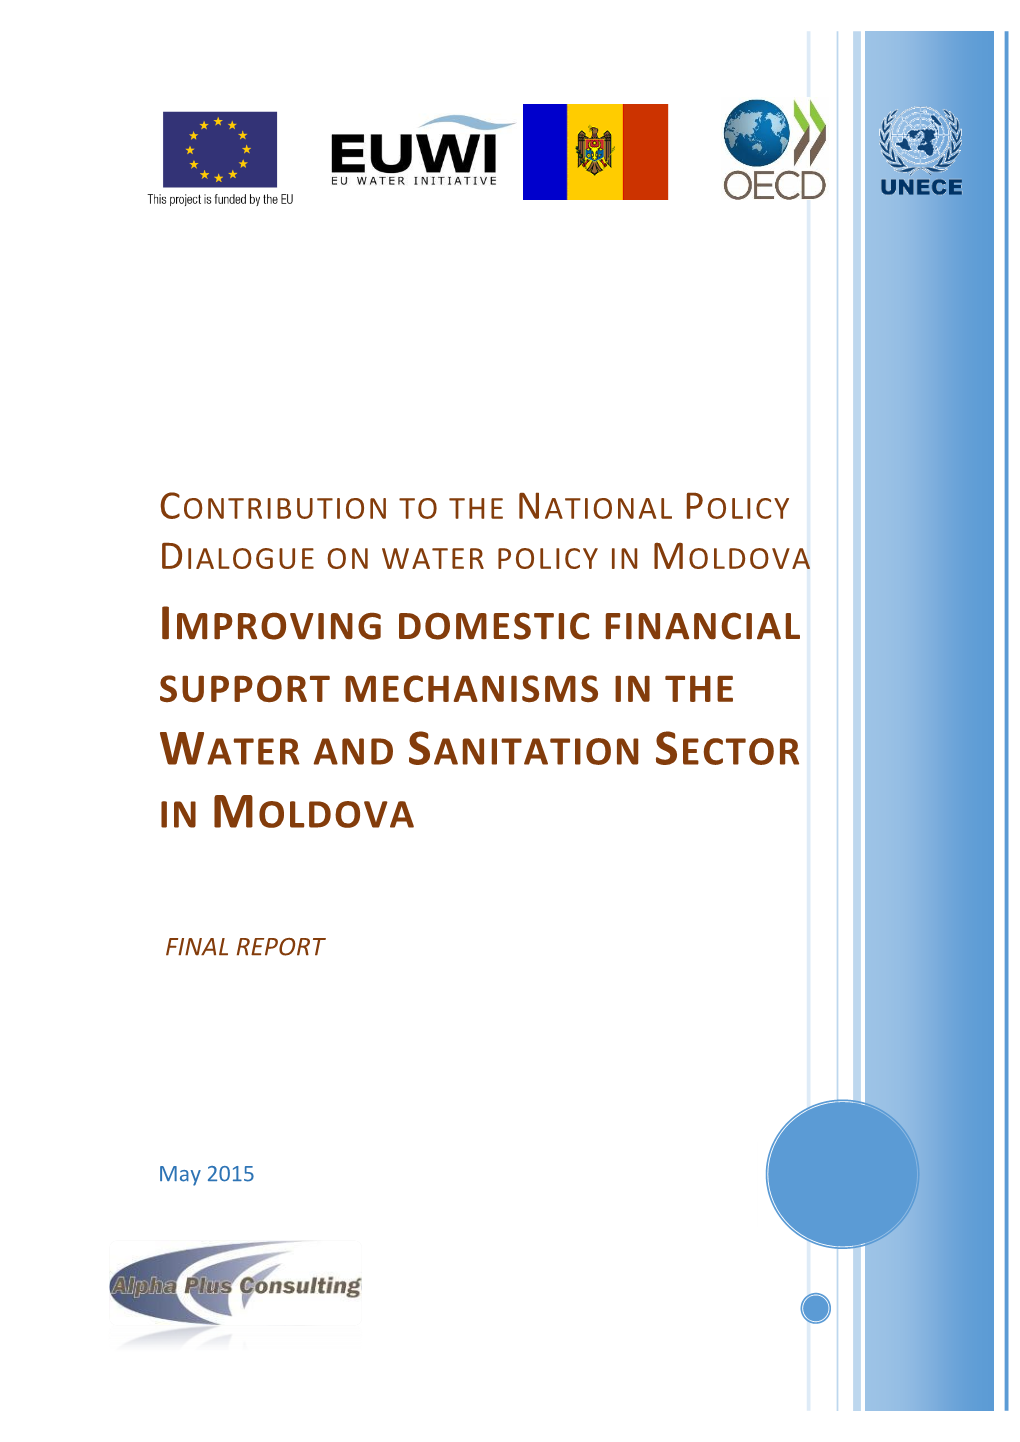 Improving Domestic Financial Support Mechanisms in the Water and Sanitation Sector in Moldova